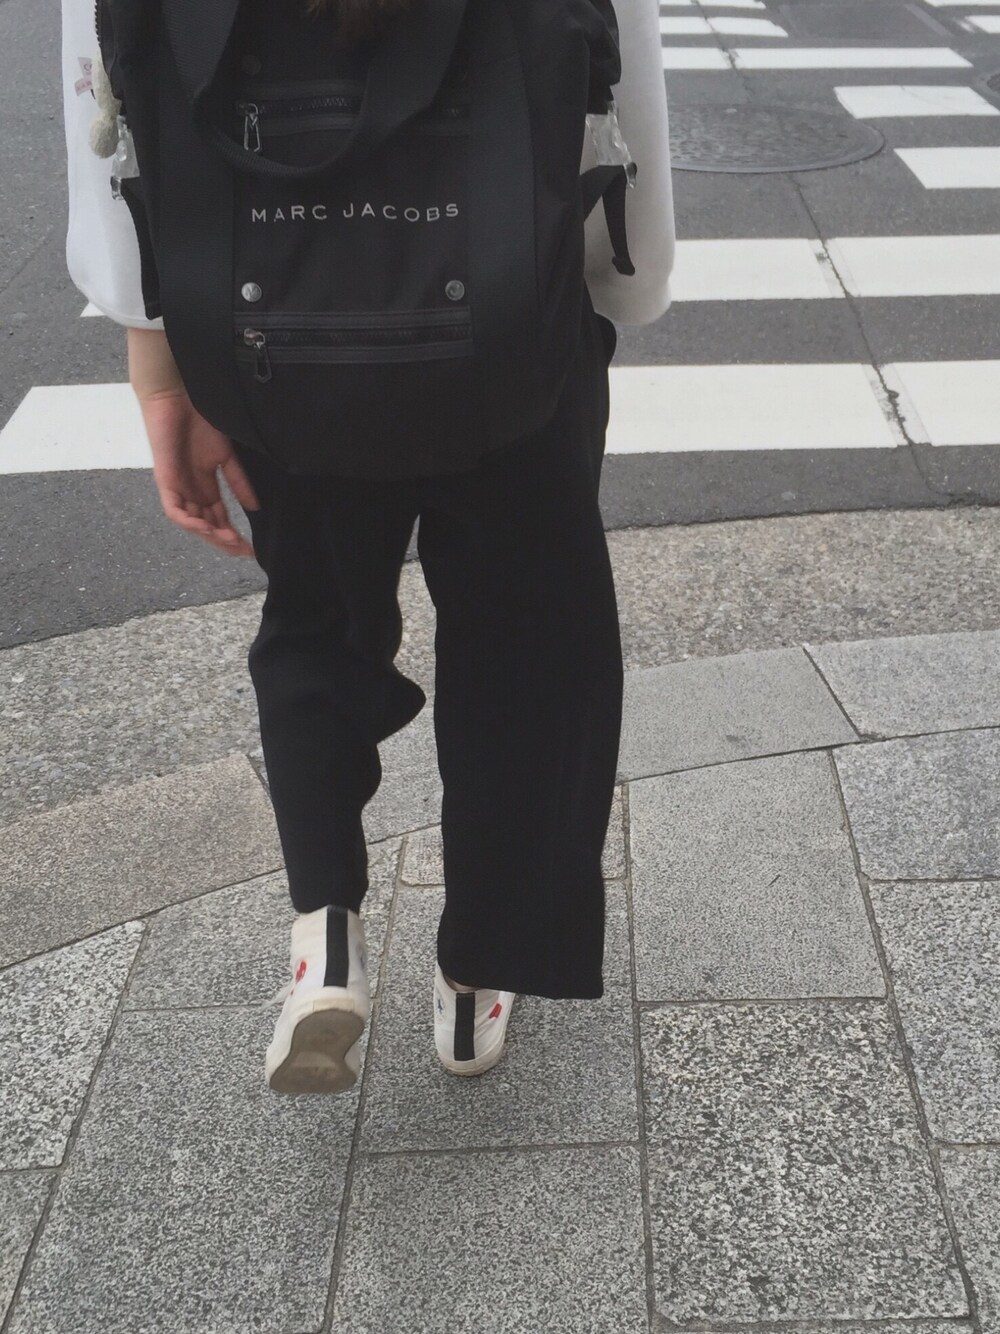 N .｜Comme des GarconsのShoes#Athleticを使ったコーディネート - WEAR